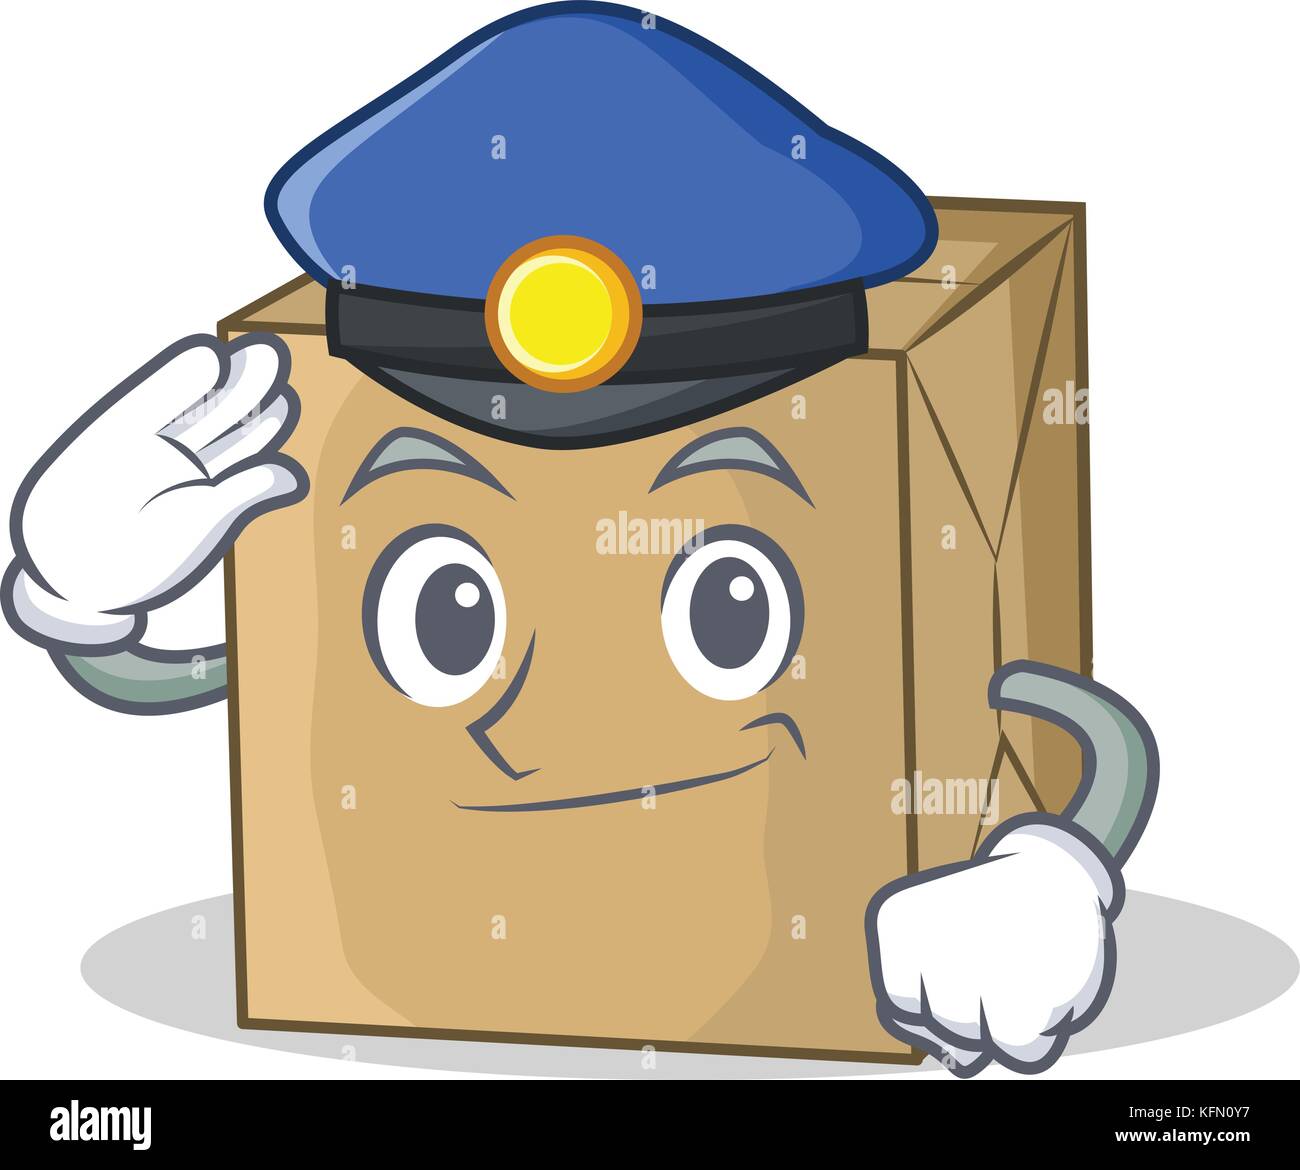 Police cardboard character character collection Stock Vector